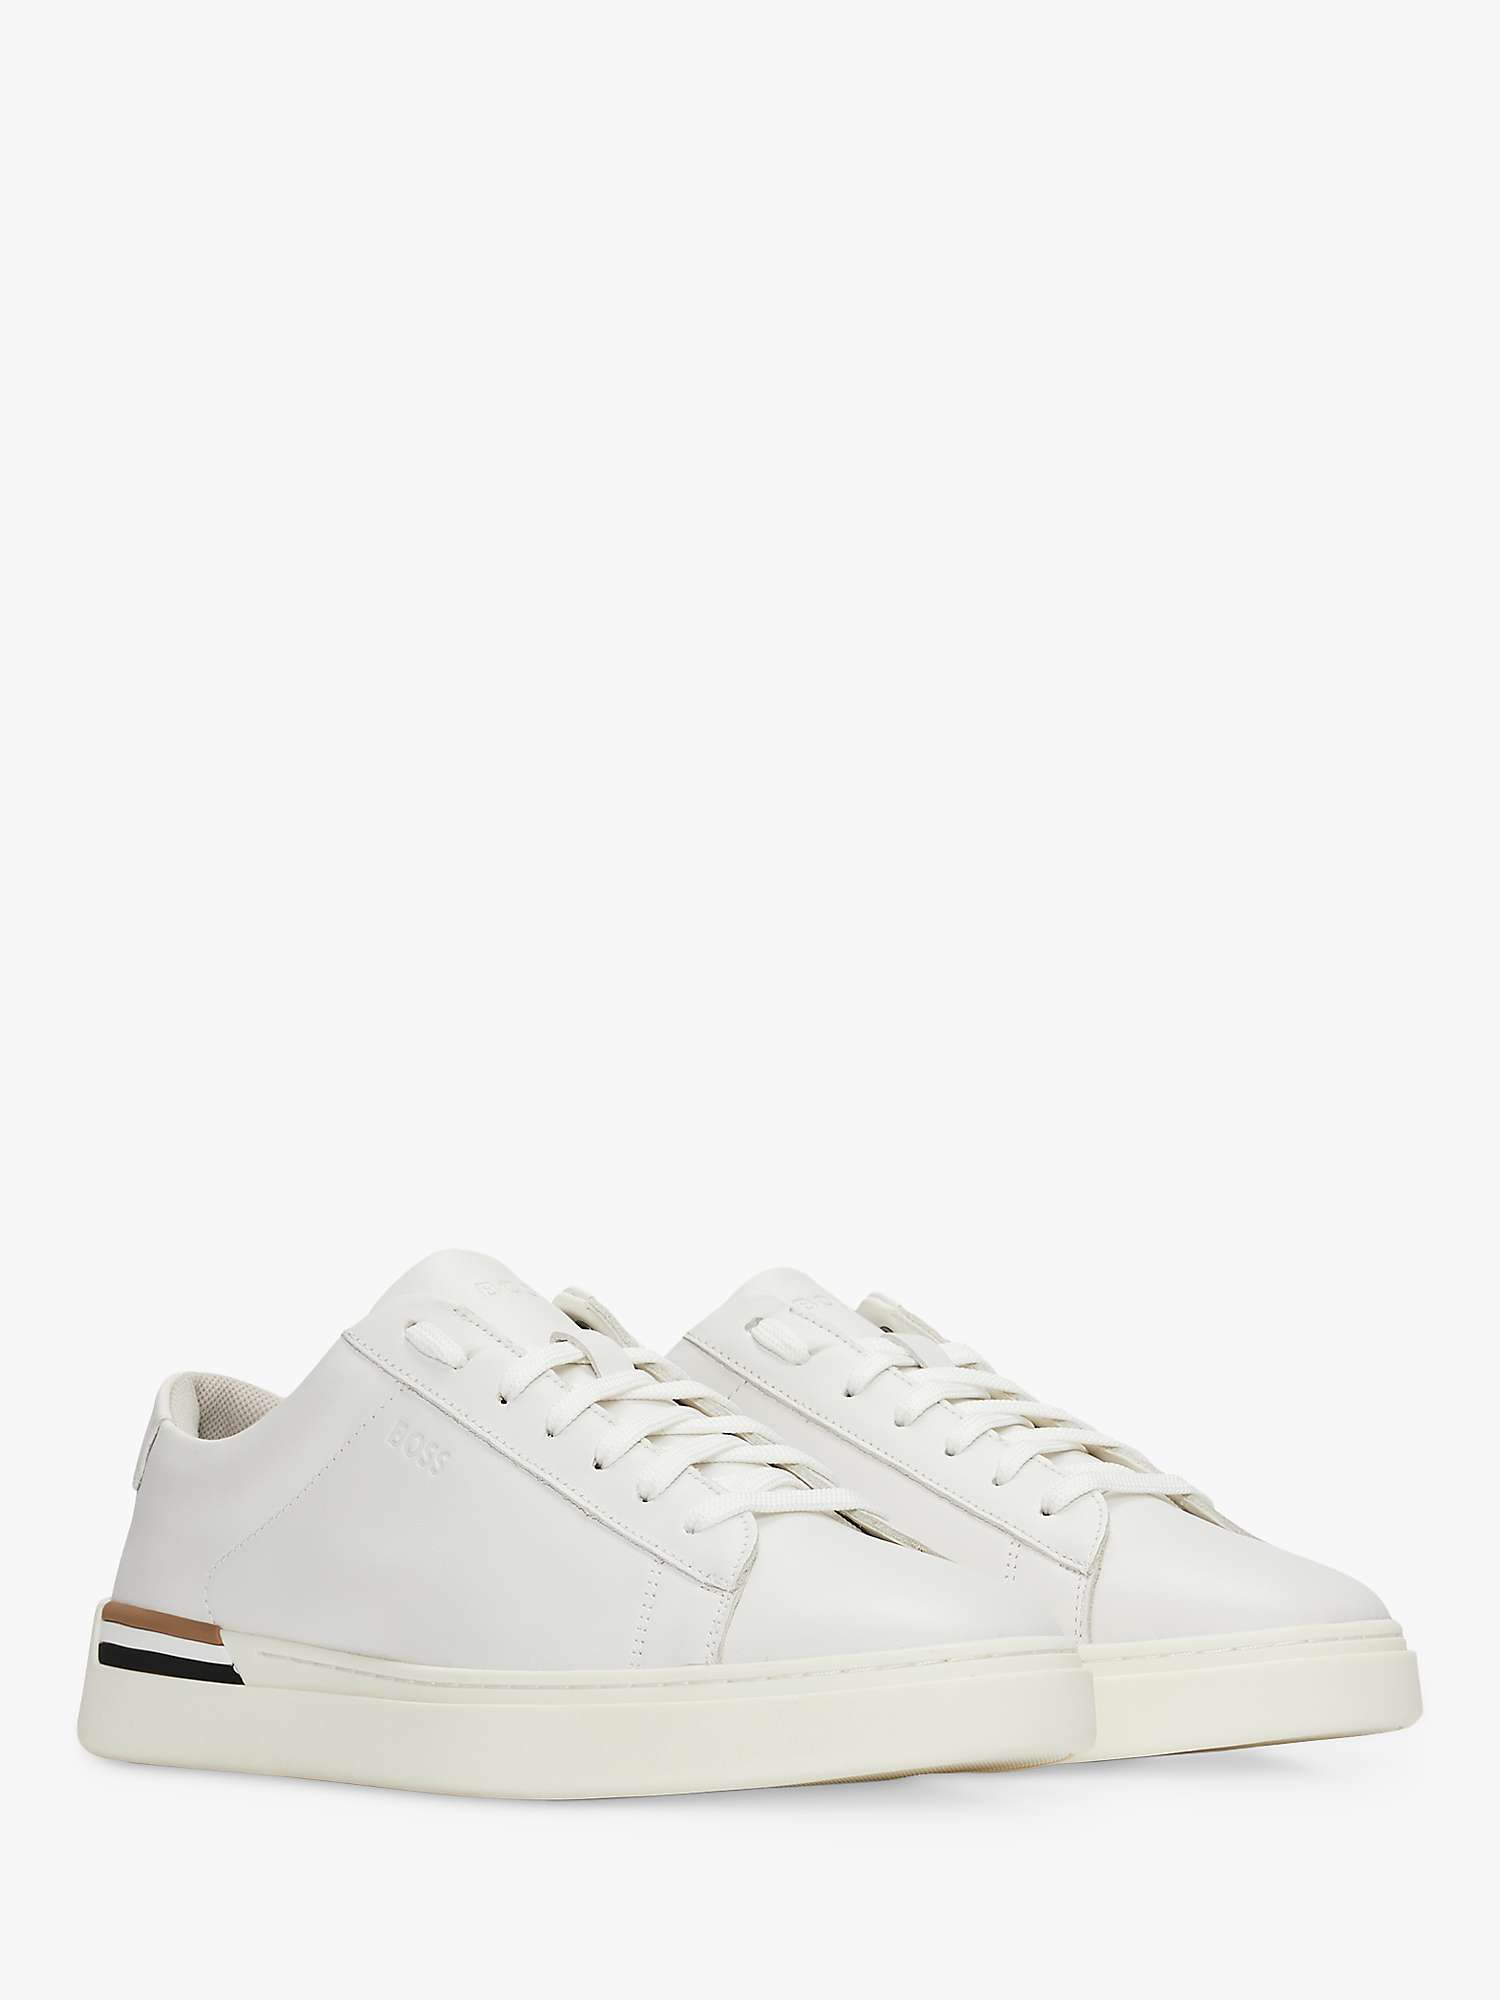 Buy BOSS Clint Lace Up Trainers, White Online at johnlewis.com